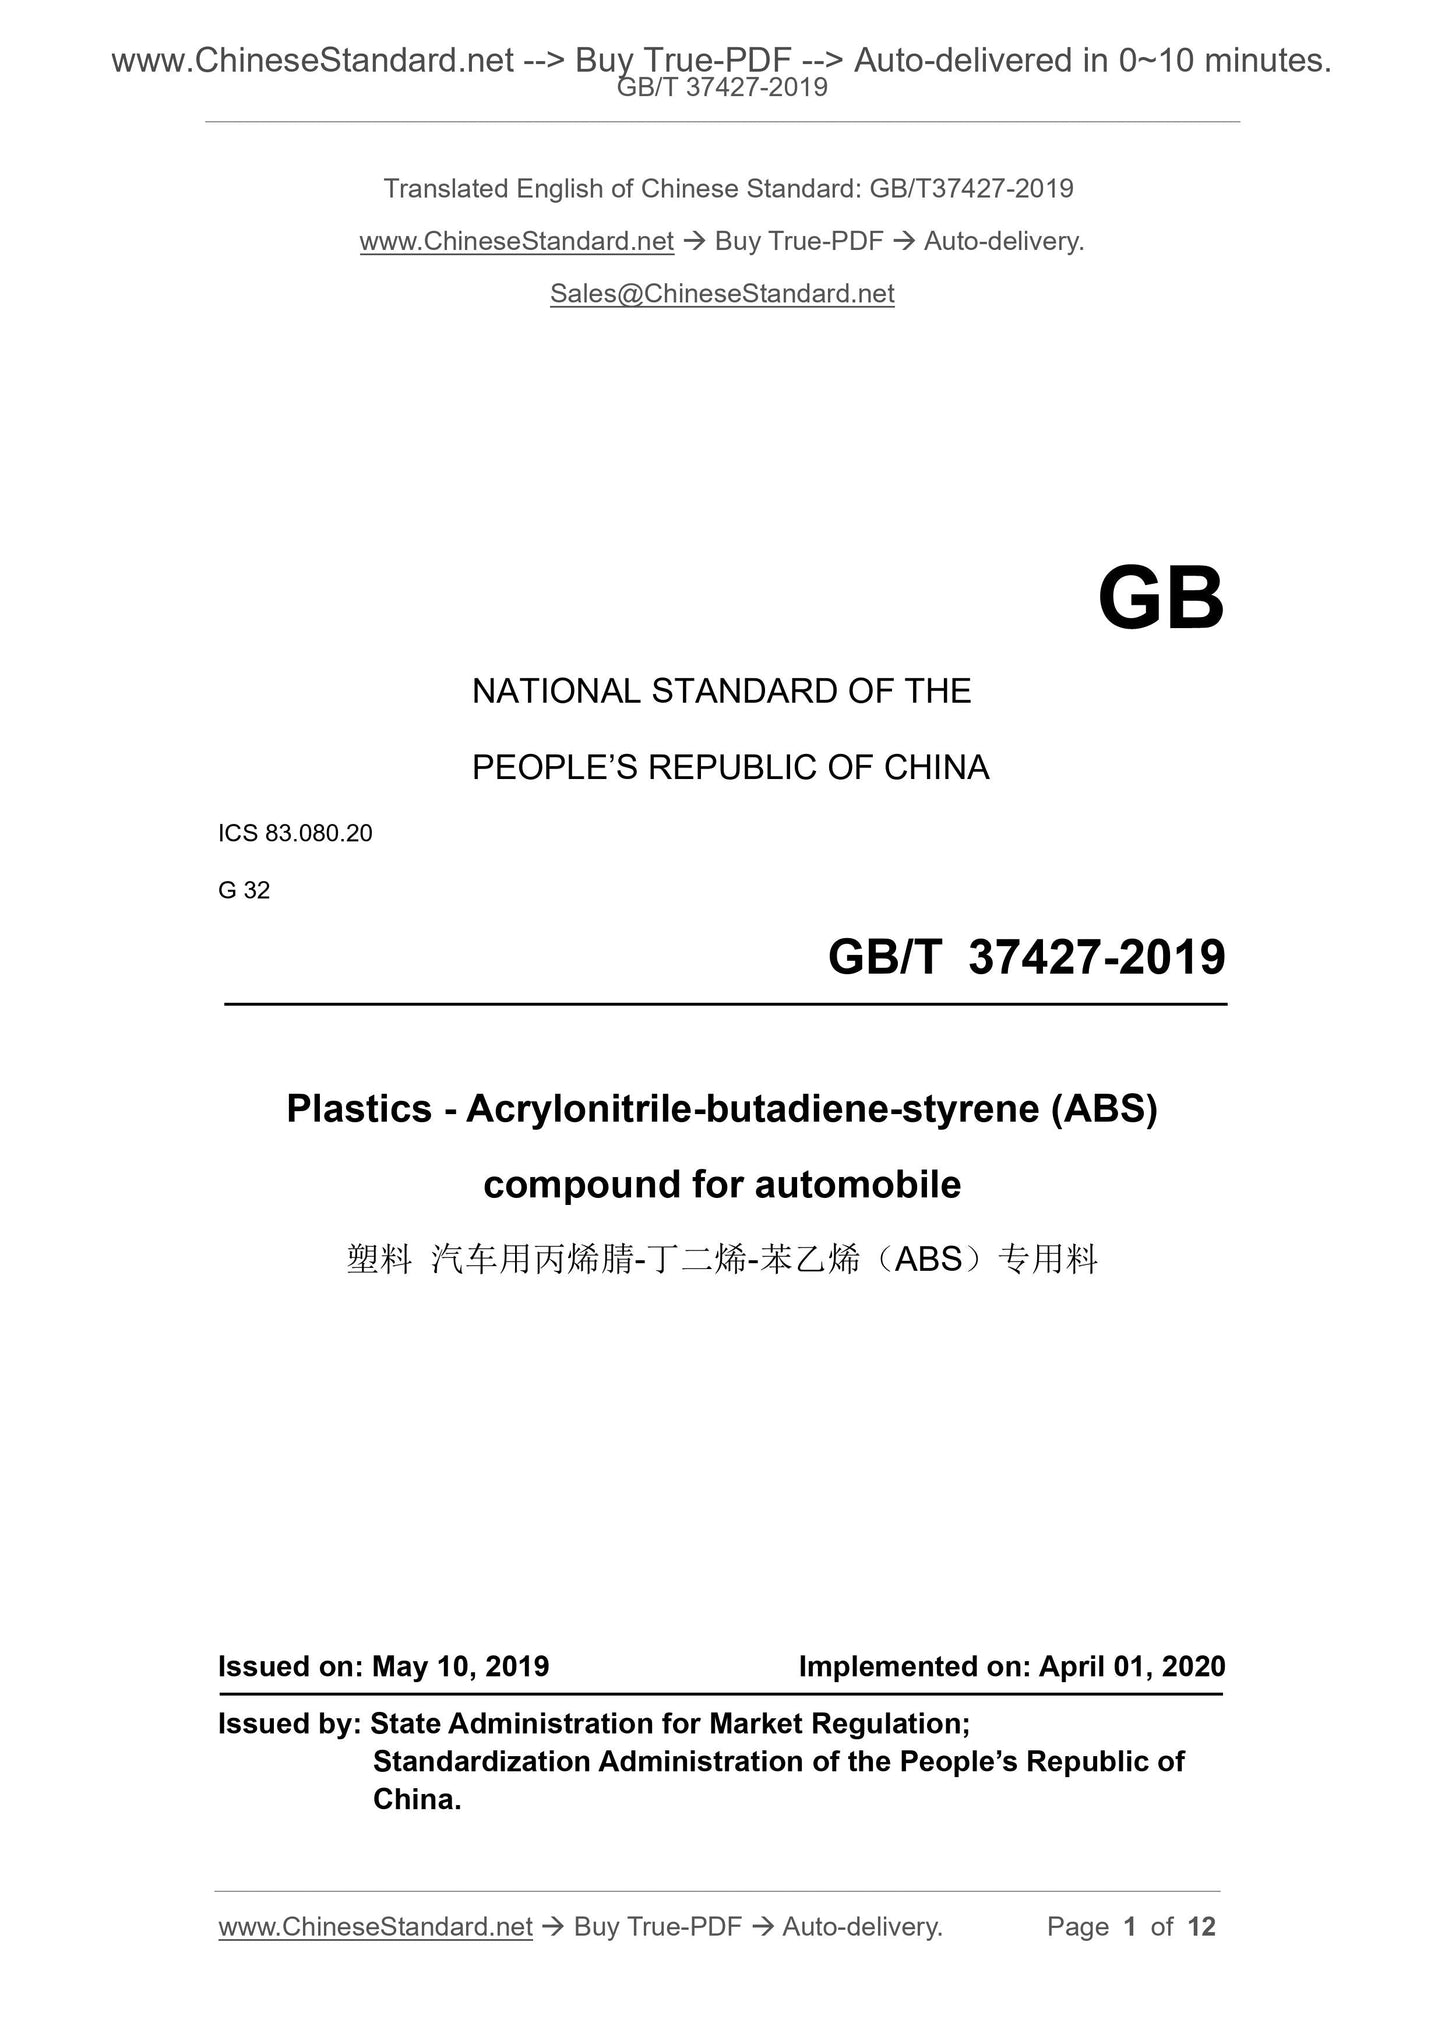 GB/T 37427-2019 Page 1